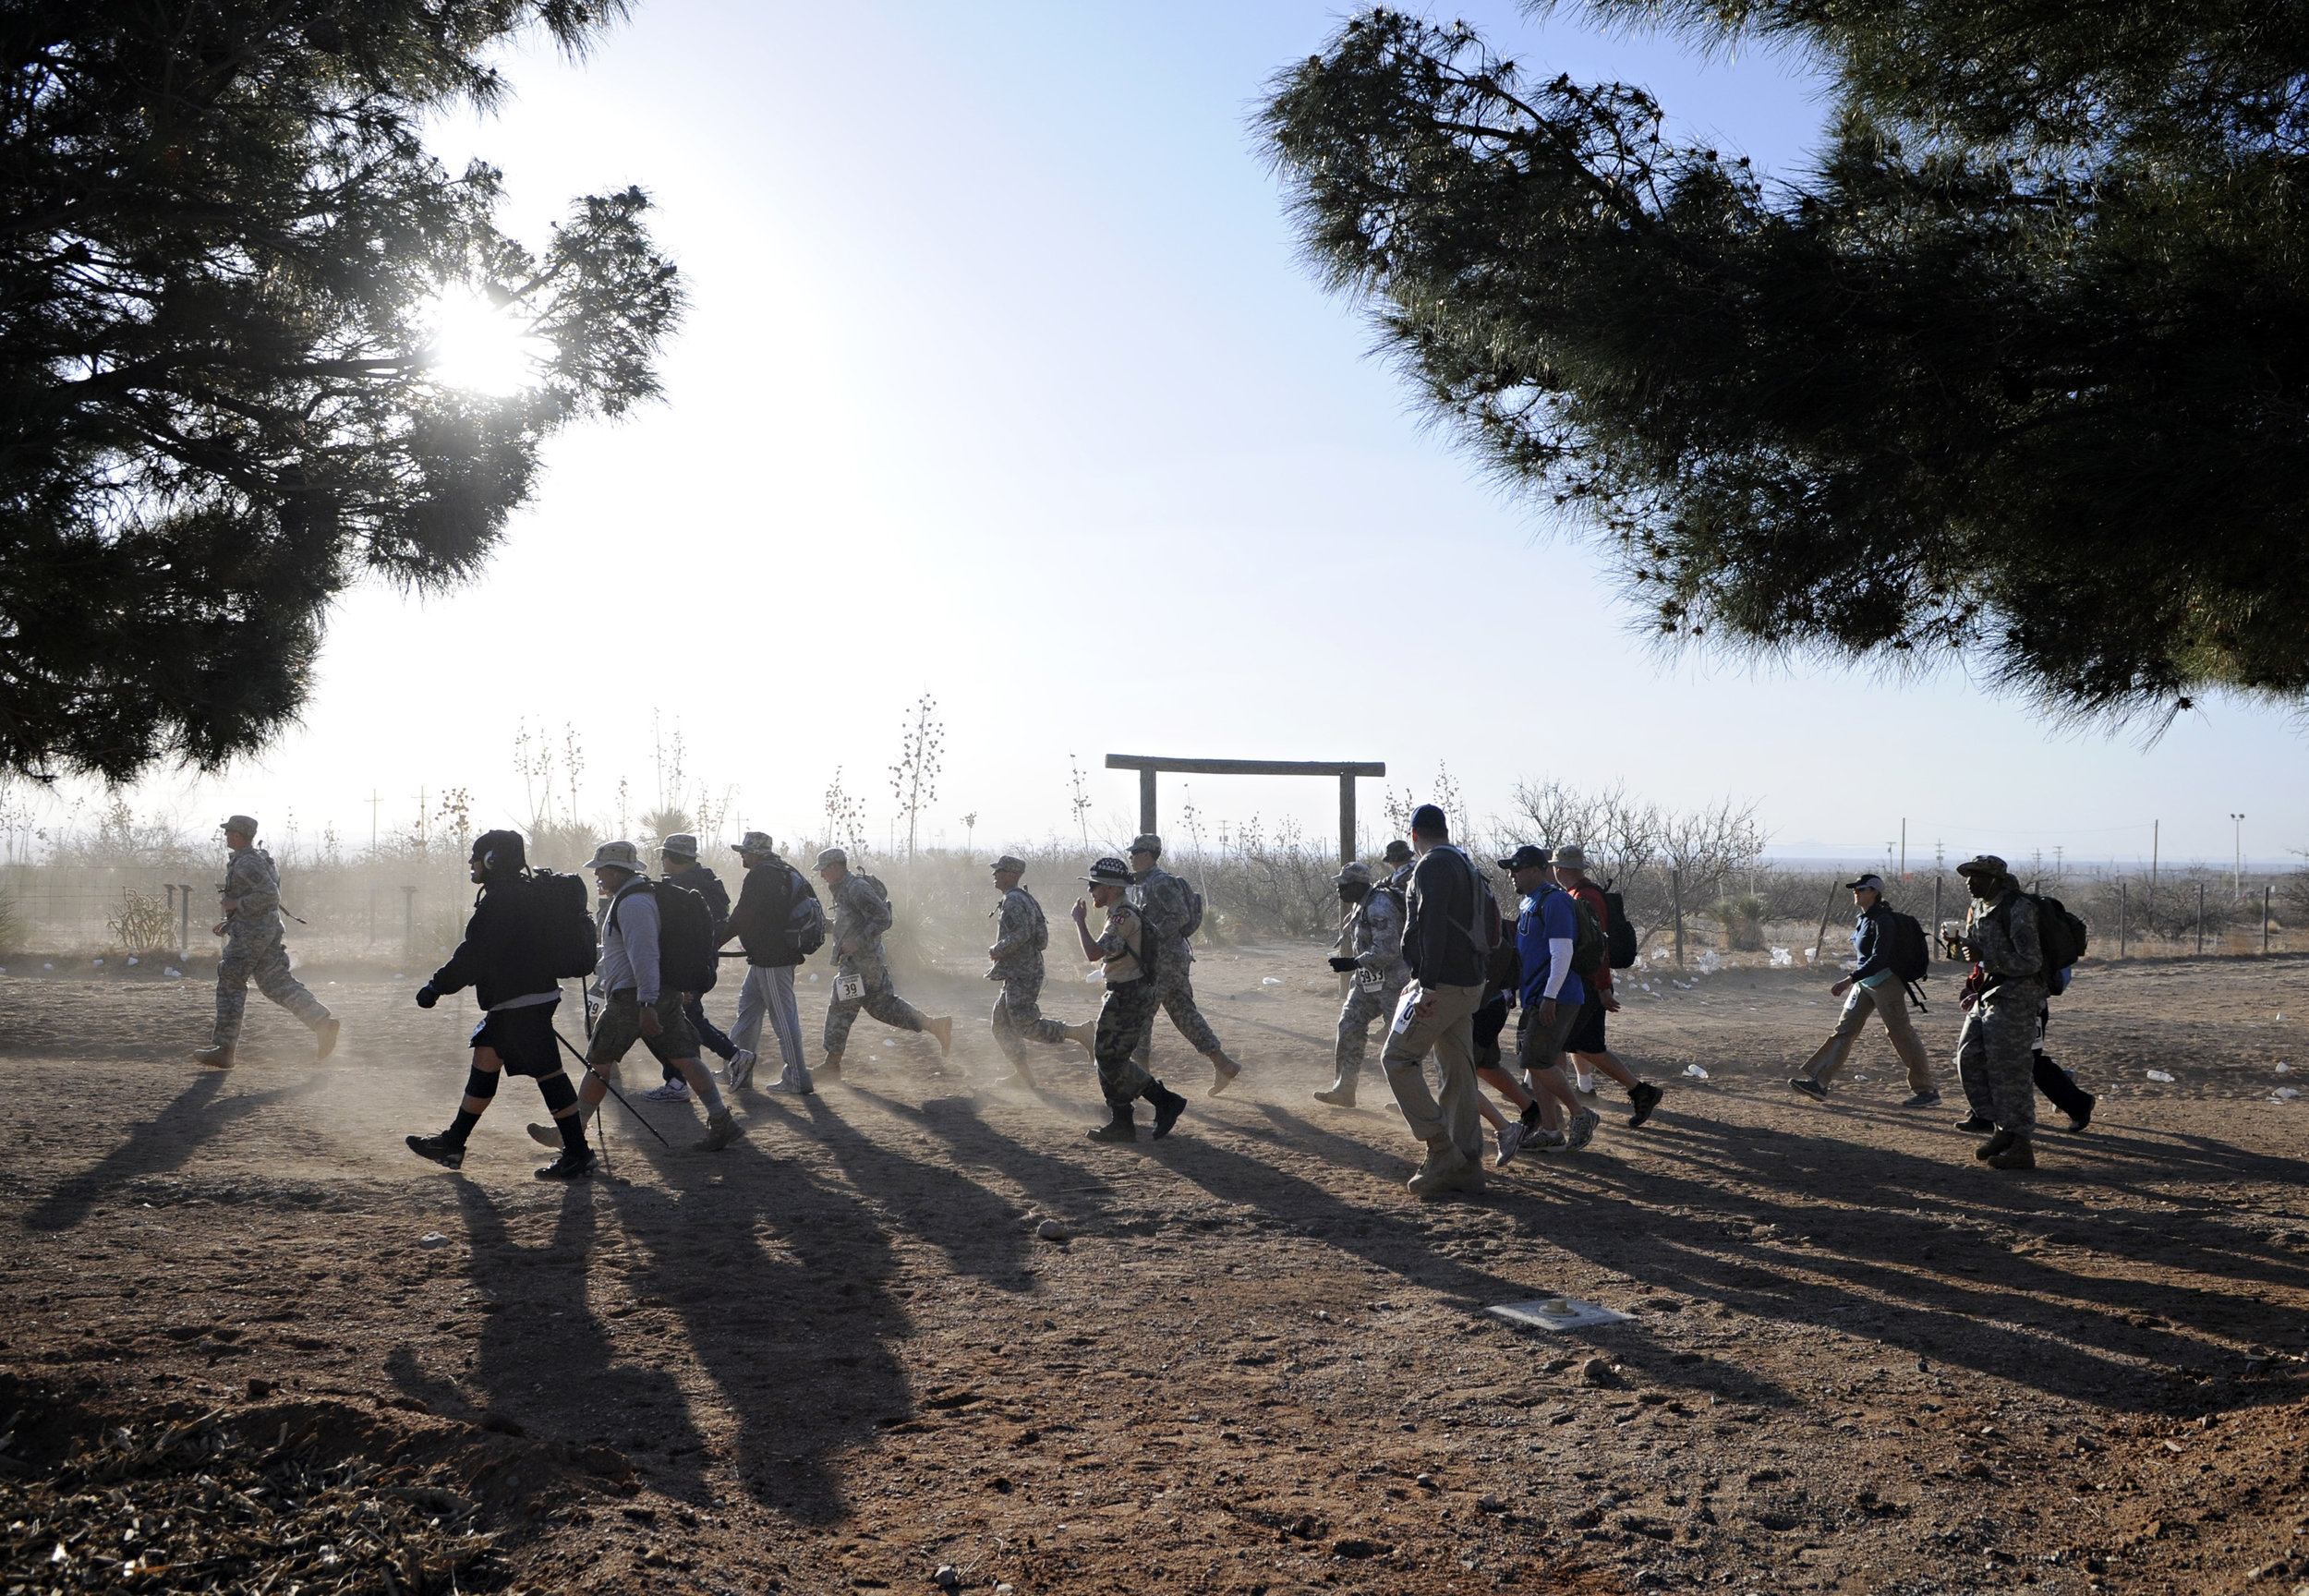  Walkers and runners kick up some dust along with the strong winds that seemed to last all day during the 22nd Annual Bataan Memorial Death March at White Sands Missile Range, Sunday, March 27, 2011. (Morgan Petroski/Albuquerque Journal) 